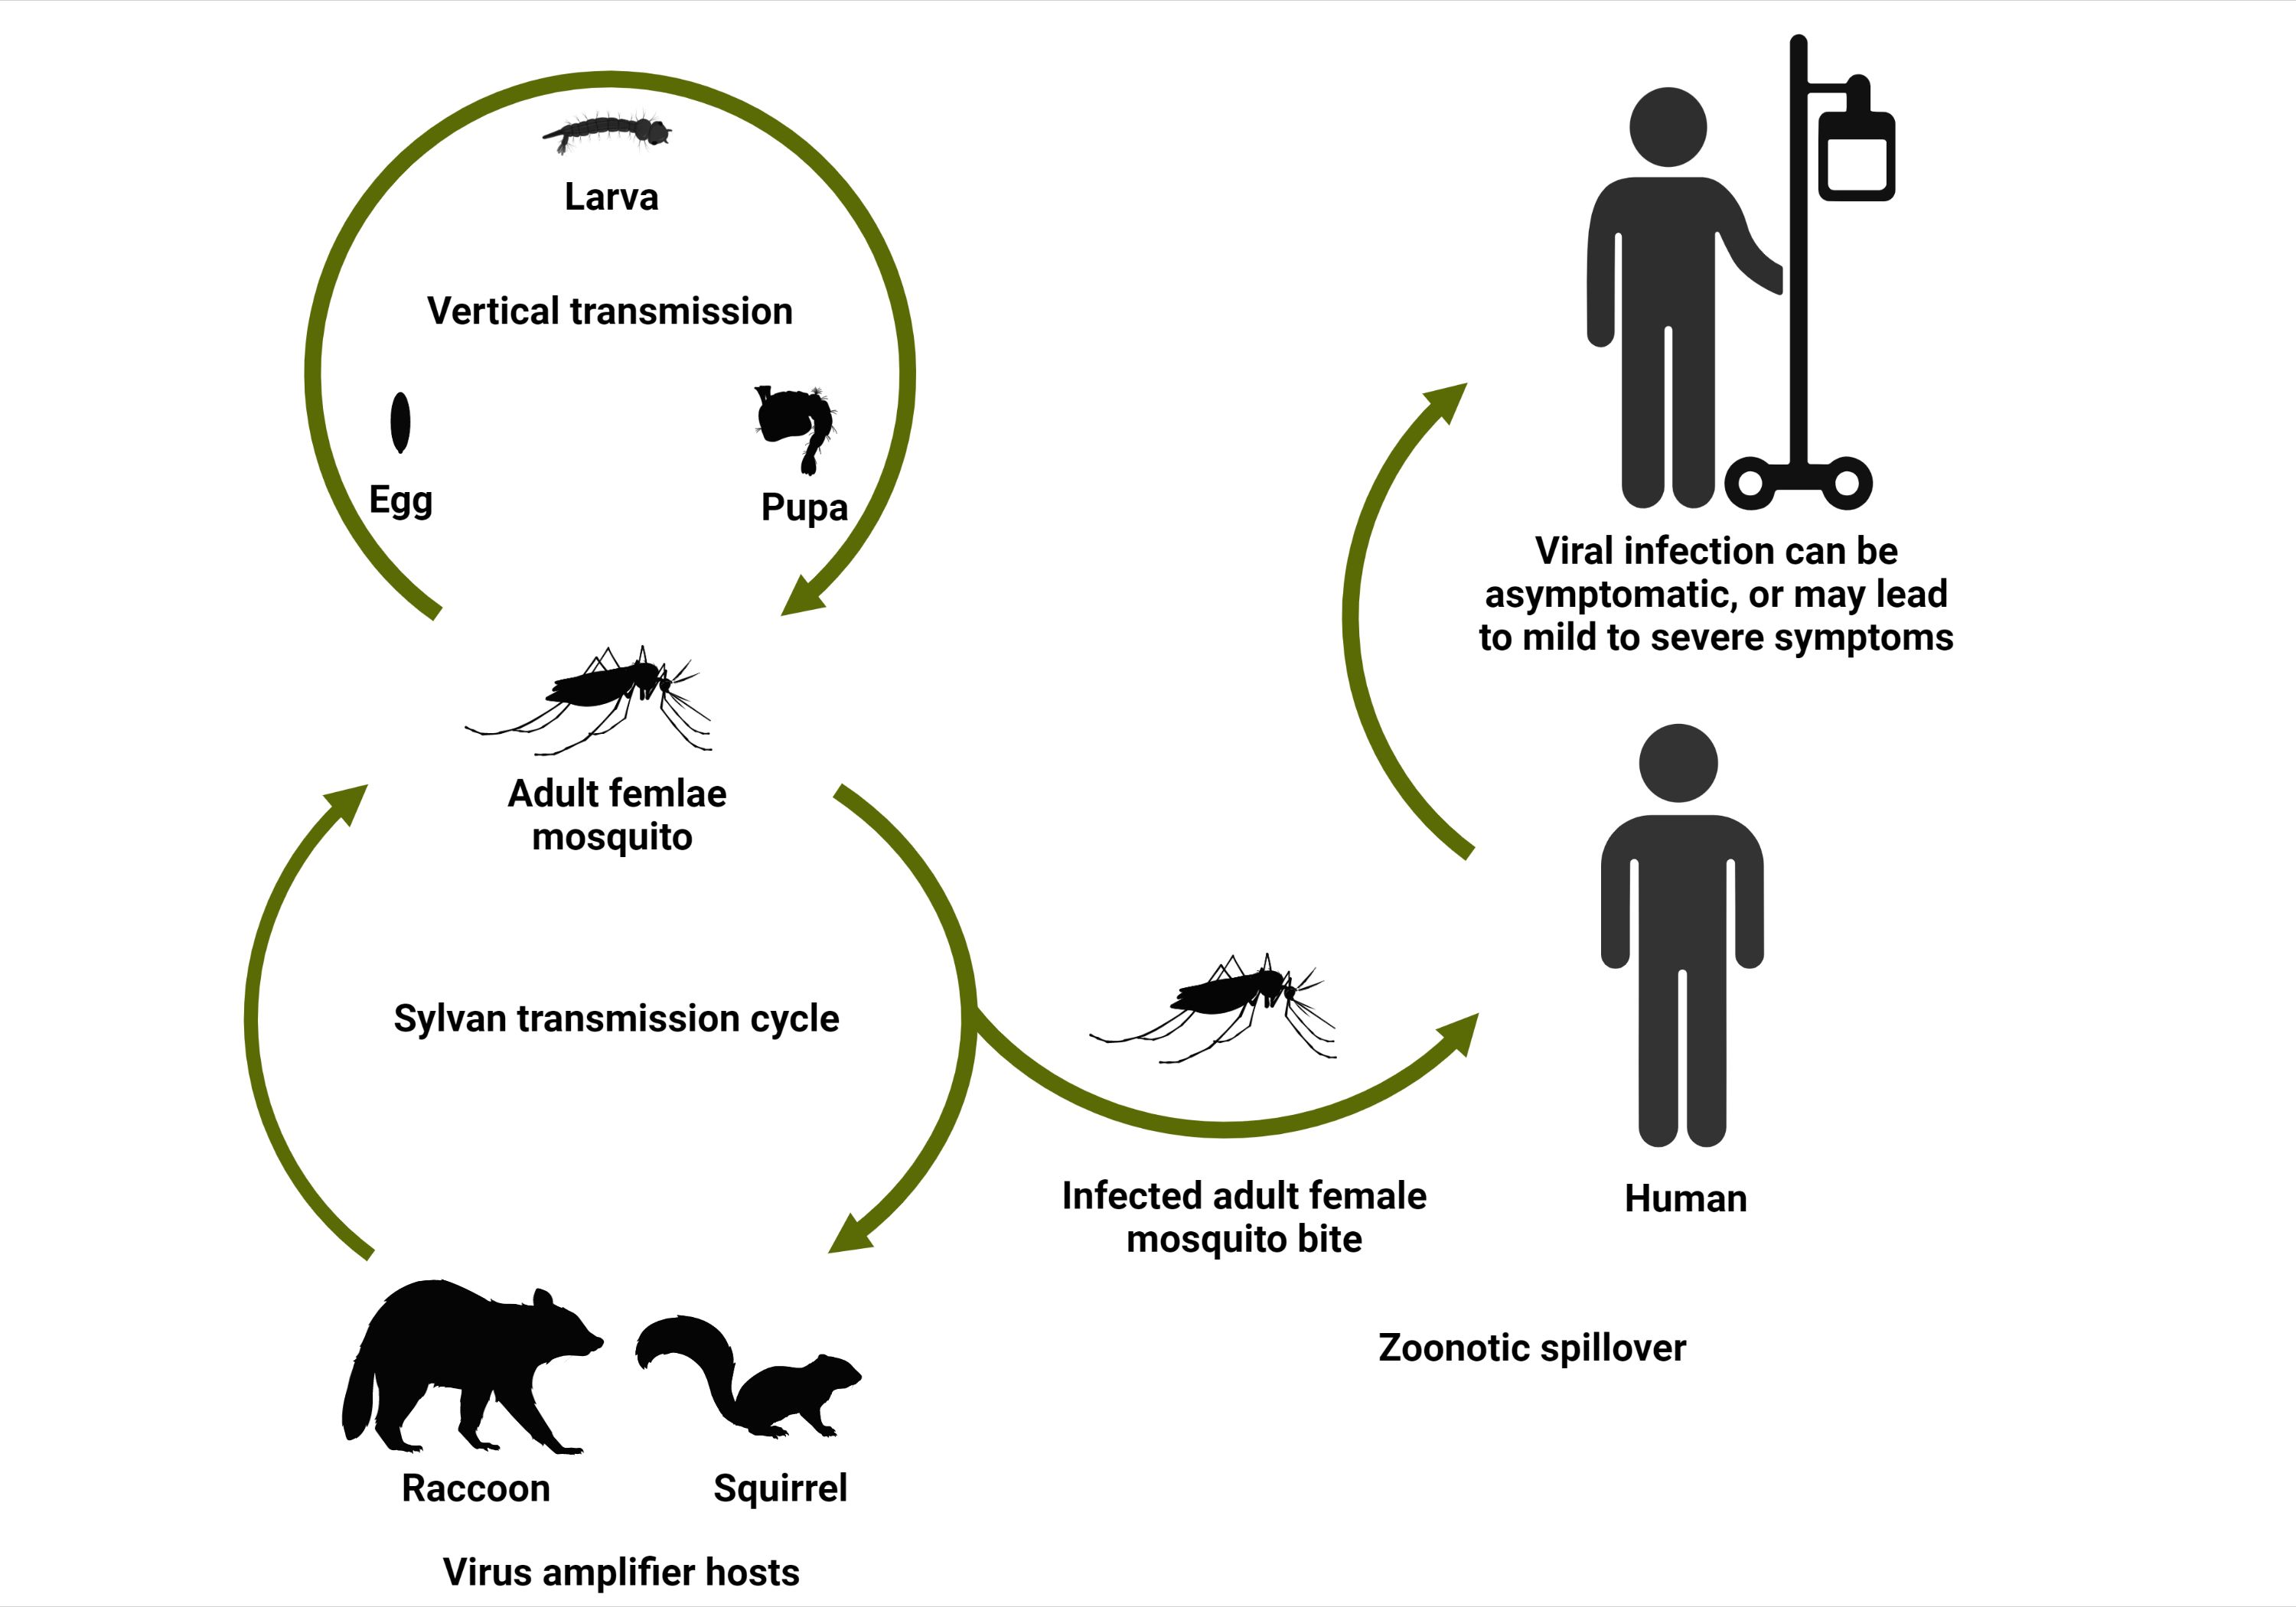 Expected transmission cycle of KEYV. Zoonotic spillover events in which a human is infected by the bite of a KEYV-infected mosquito can be asymptomatic, or they may lead to mild symptoms like fever or rash, or severe symptoms like encephalitis-related neurological problems. 